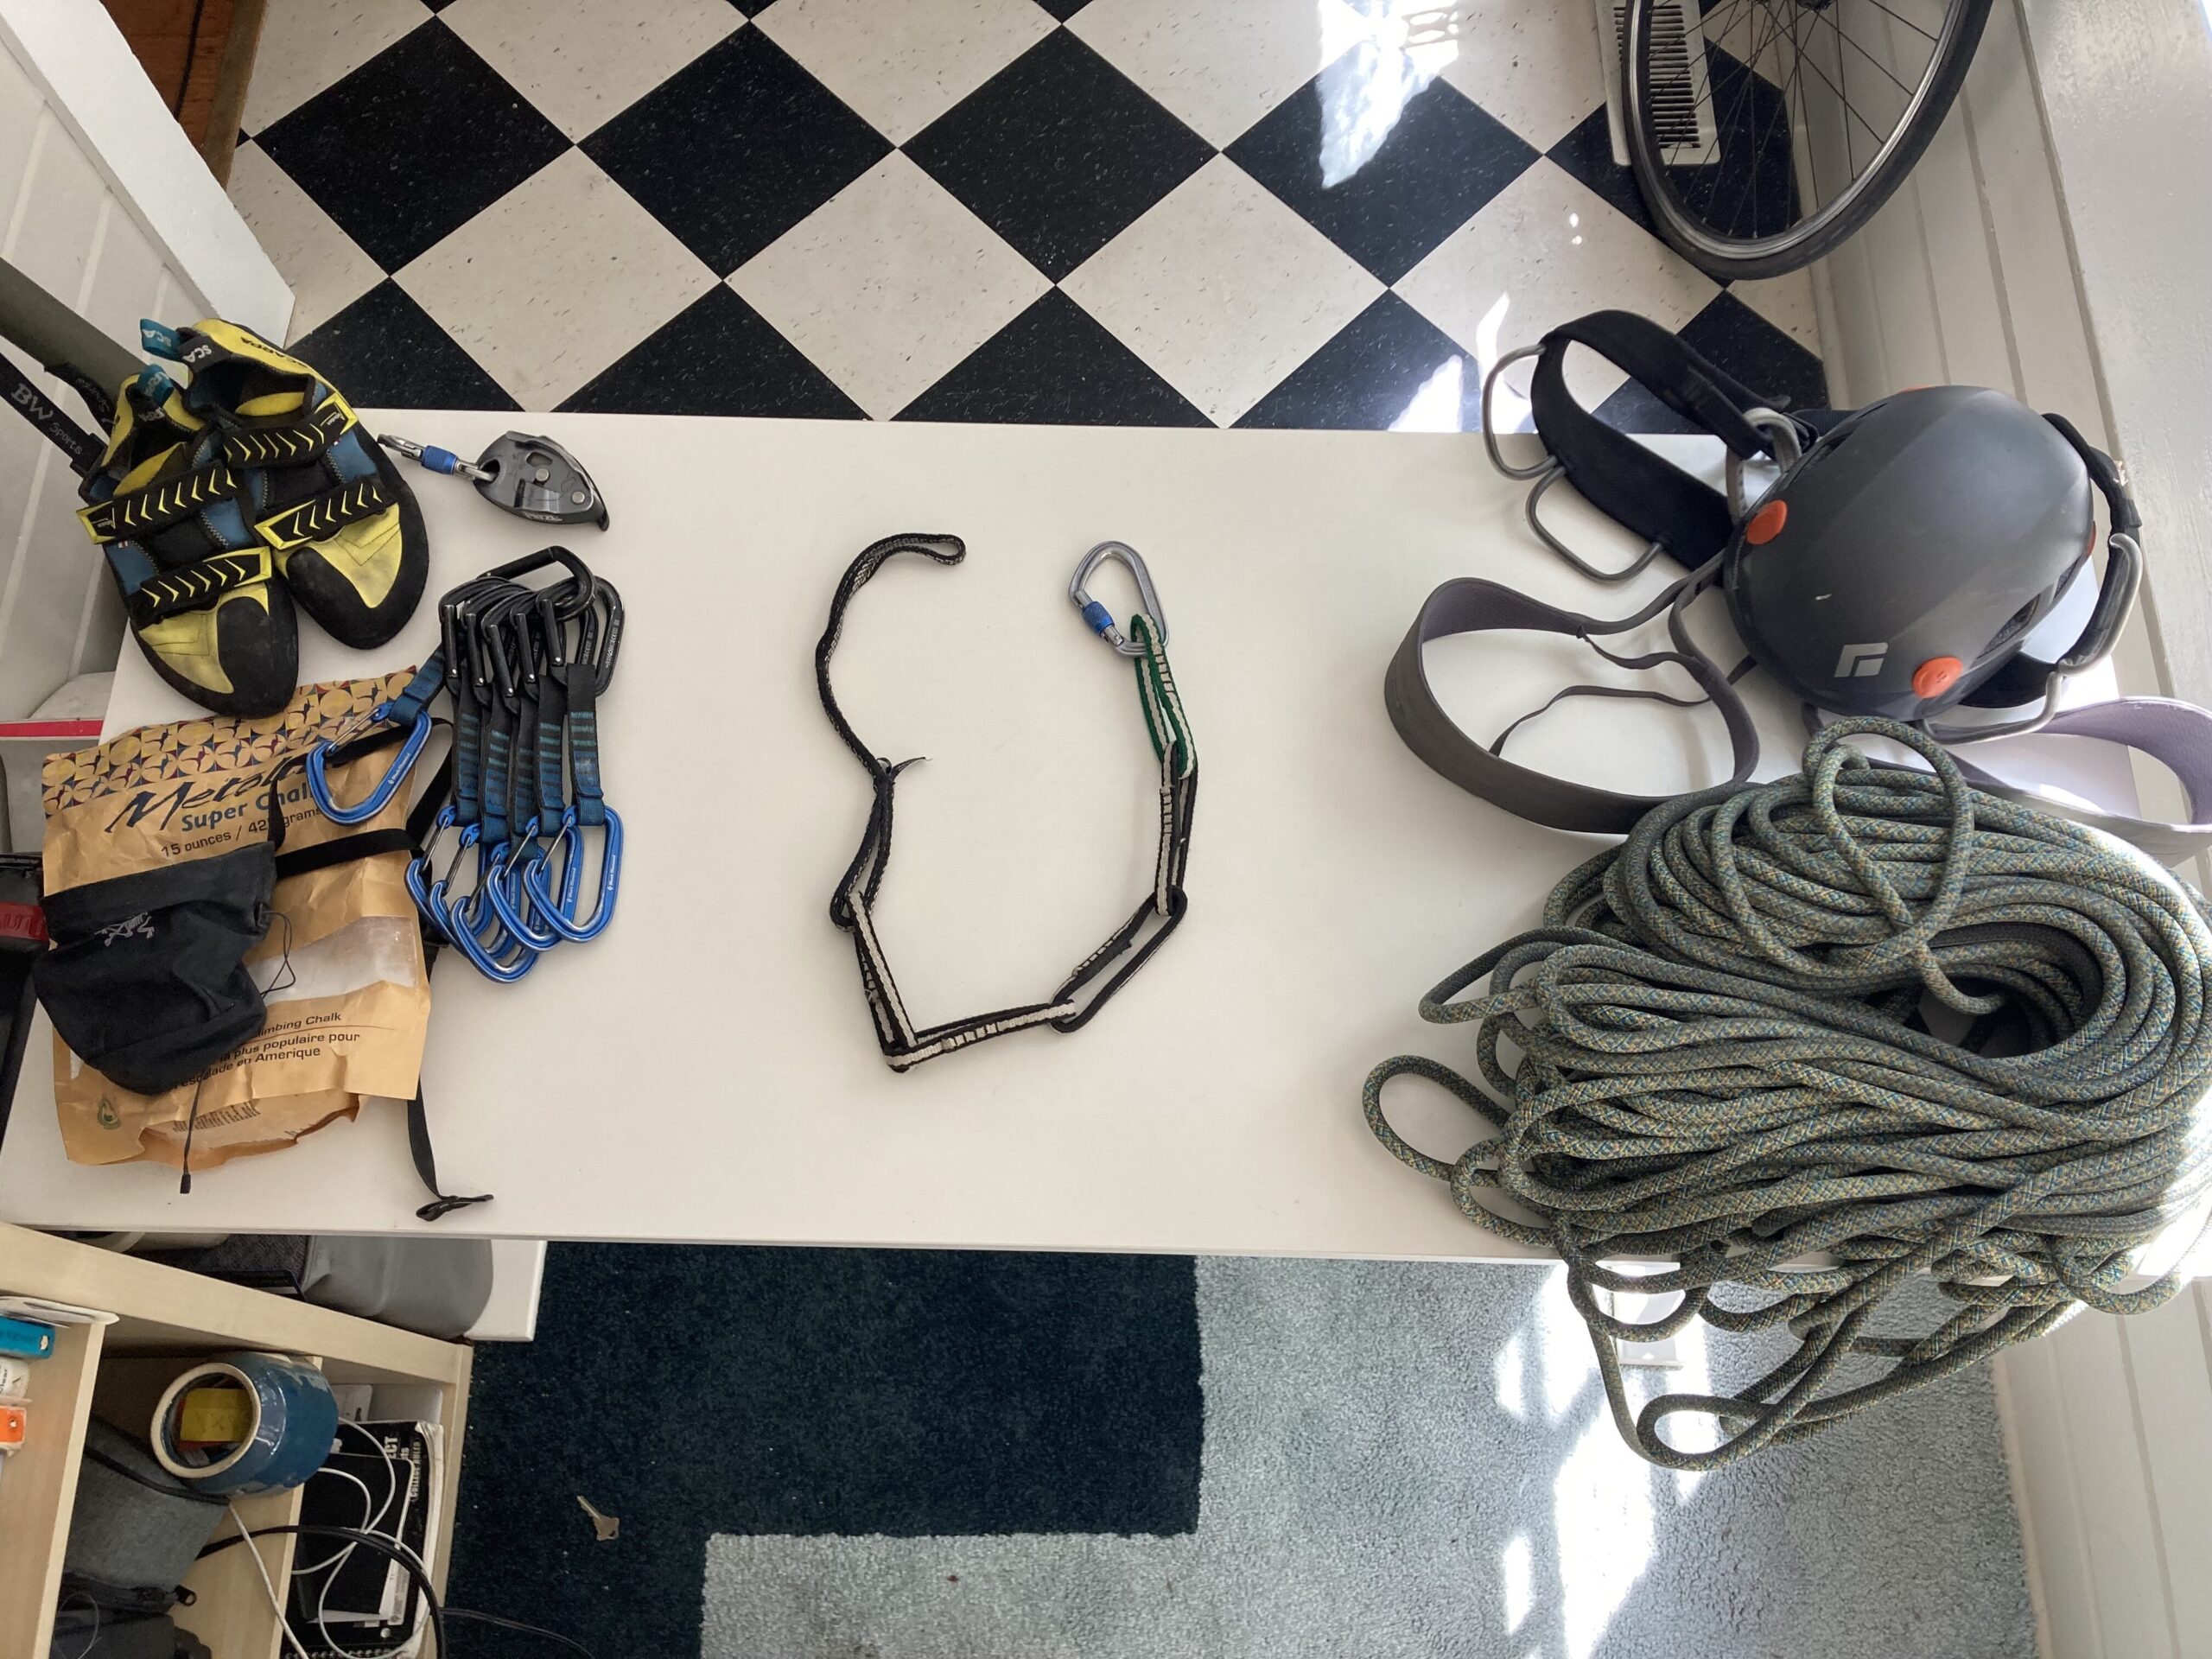 Rock climbing gear with PAS in center